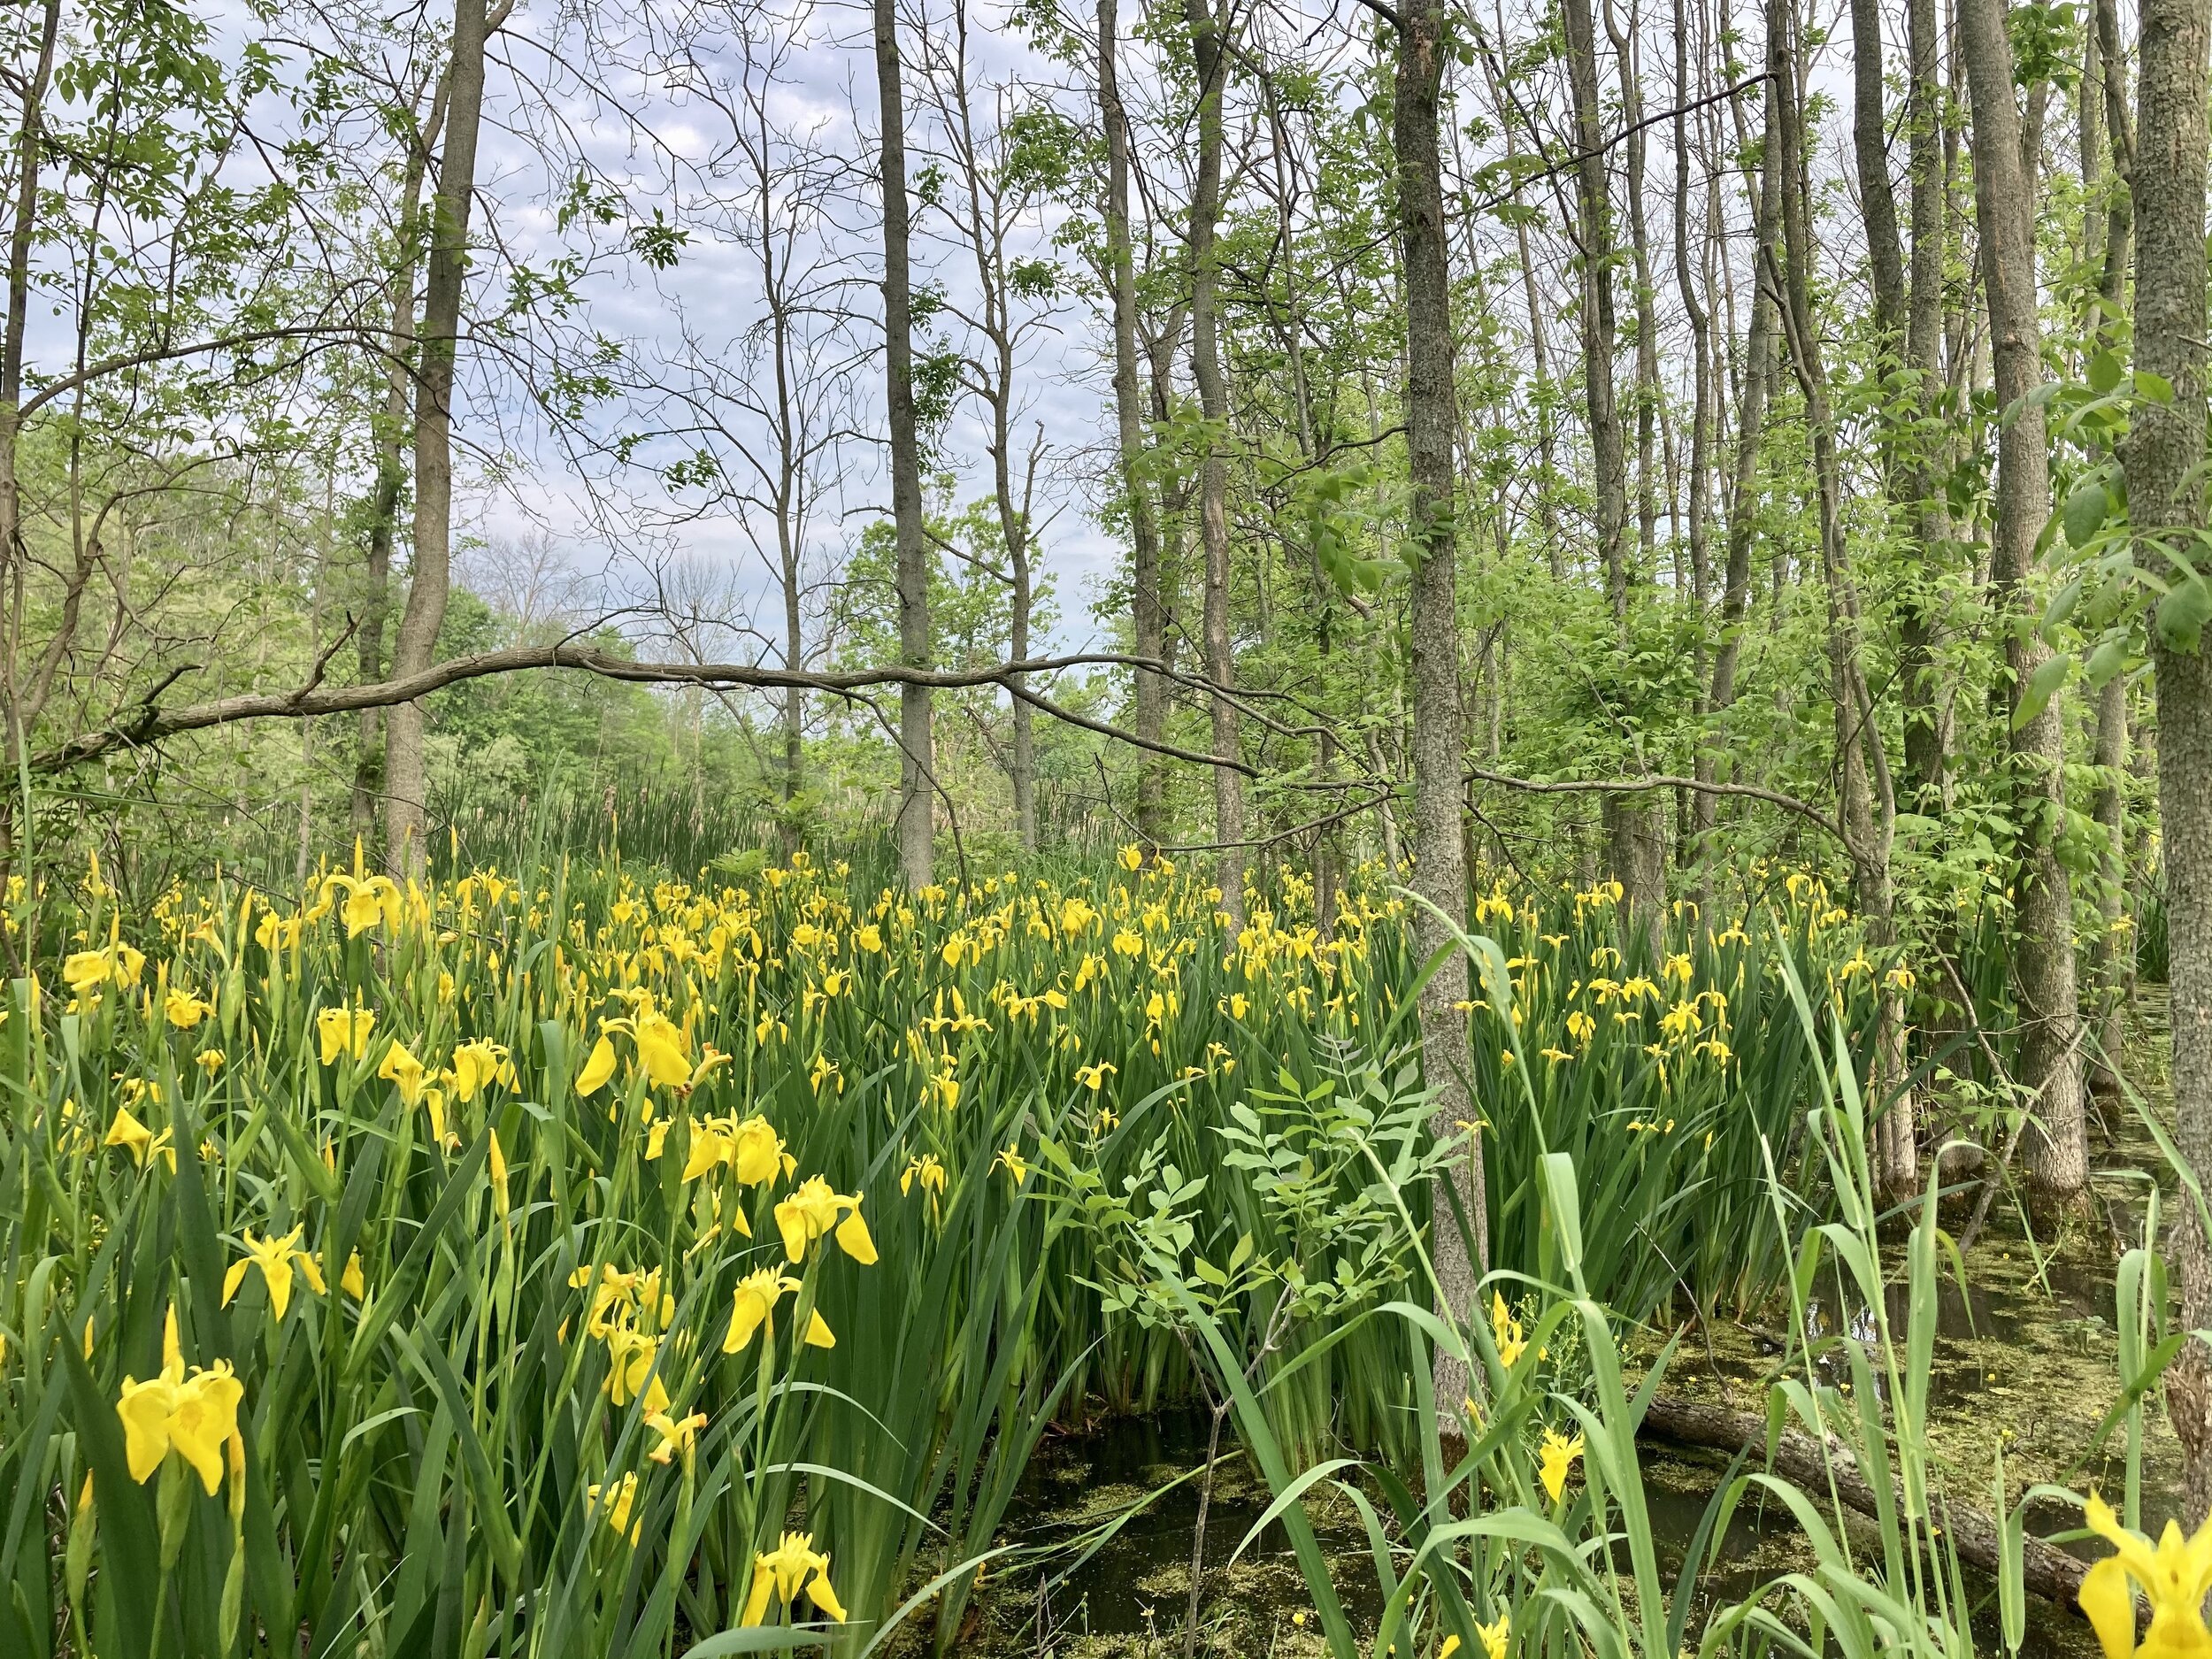 Bright yellow swamp irises cover the ground with tall tree trunks behind